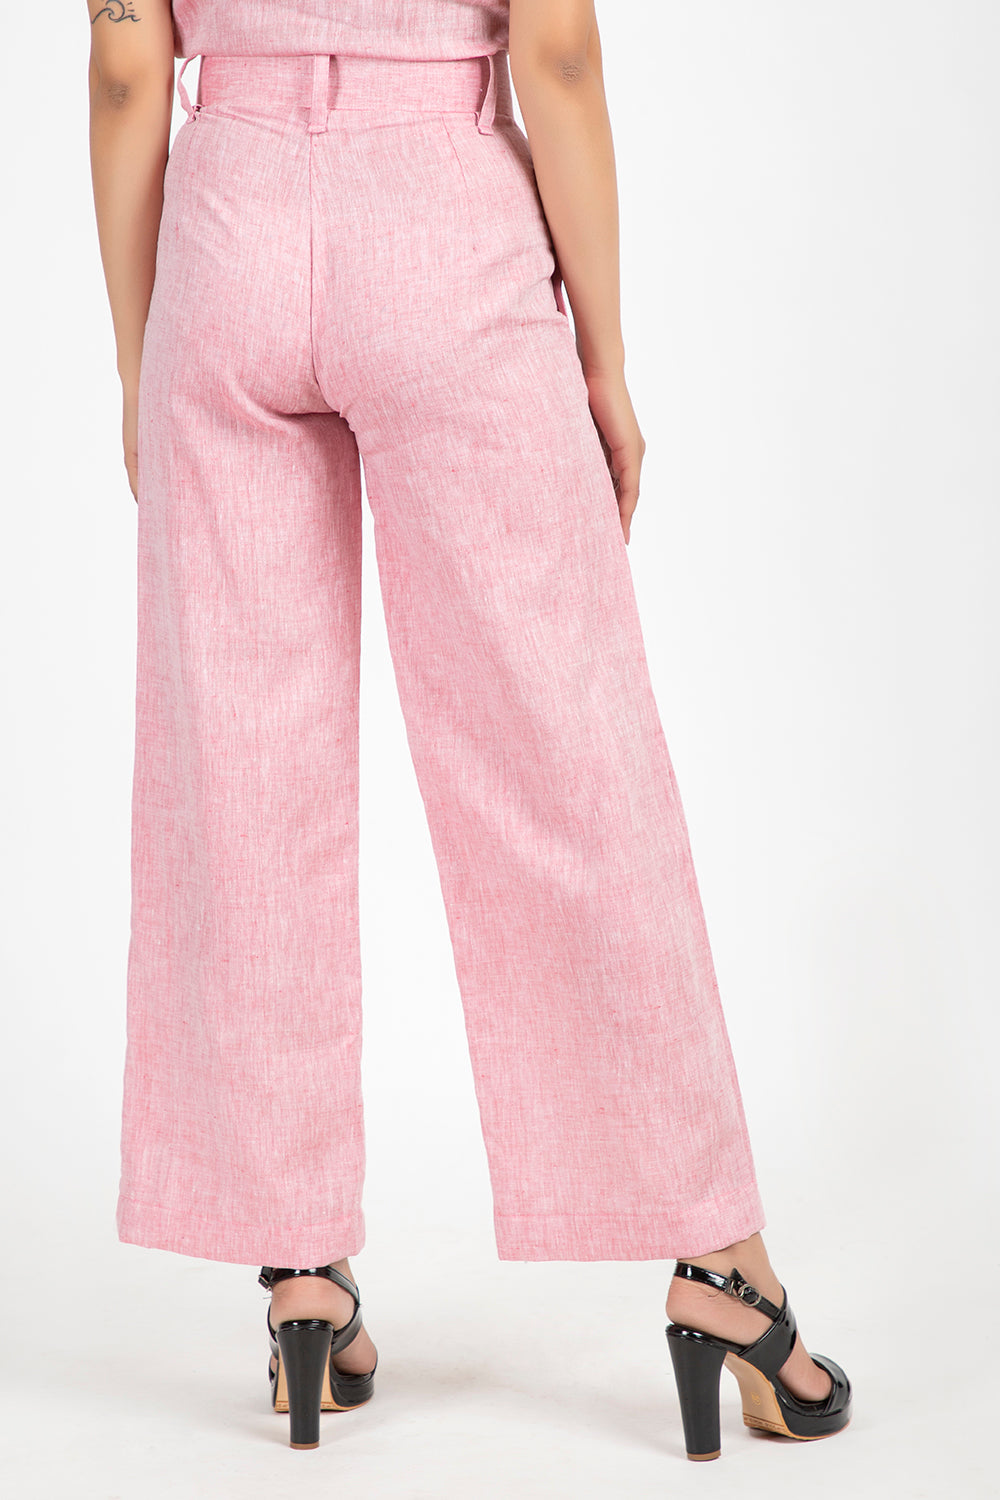 Parallel Trousers Womens Trousers  Buy Parallel Trousers Womens Trousers  Online at Best Prices In India  Flipkartcom